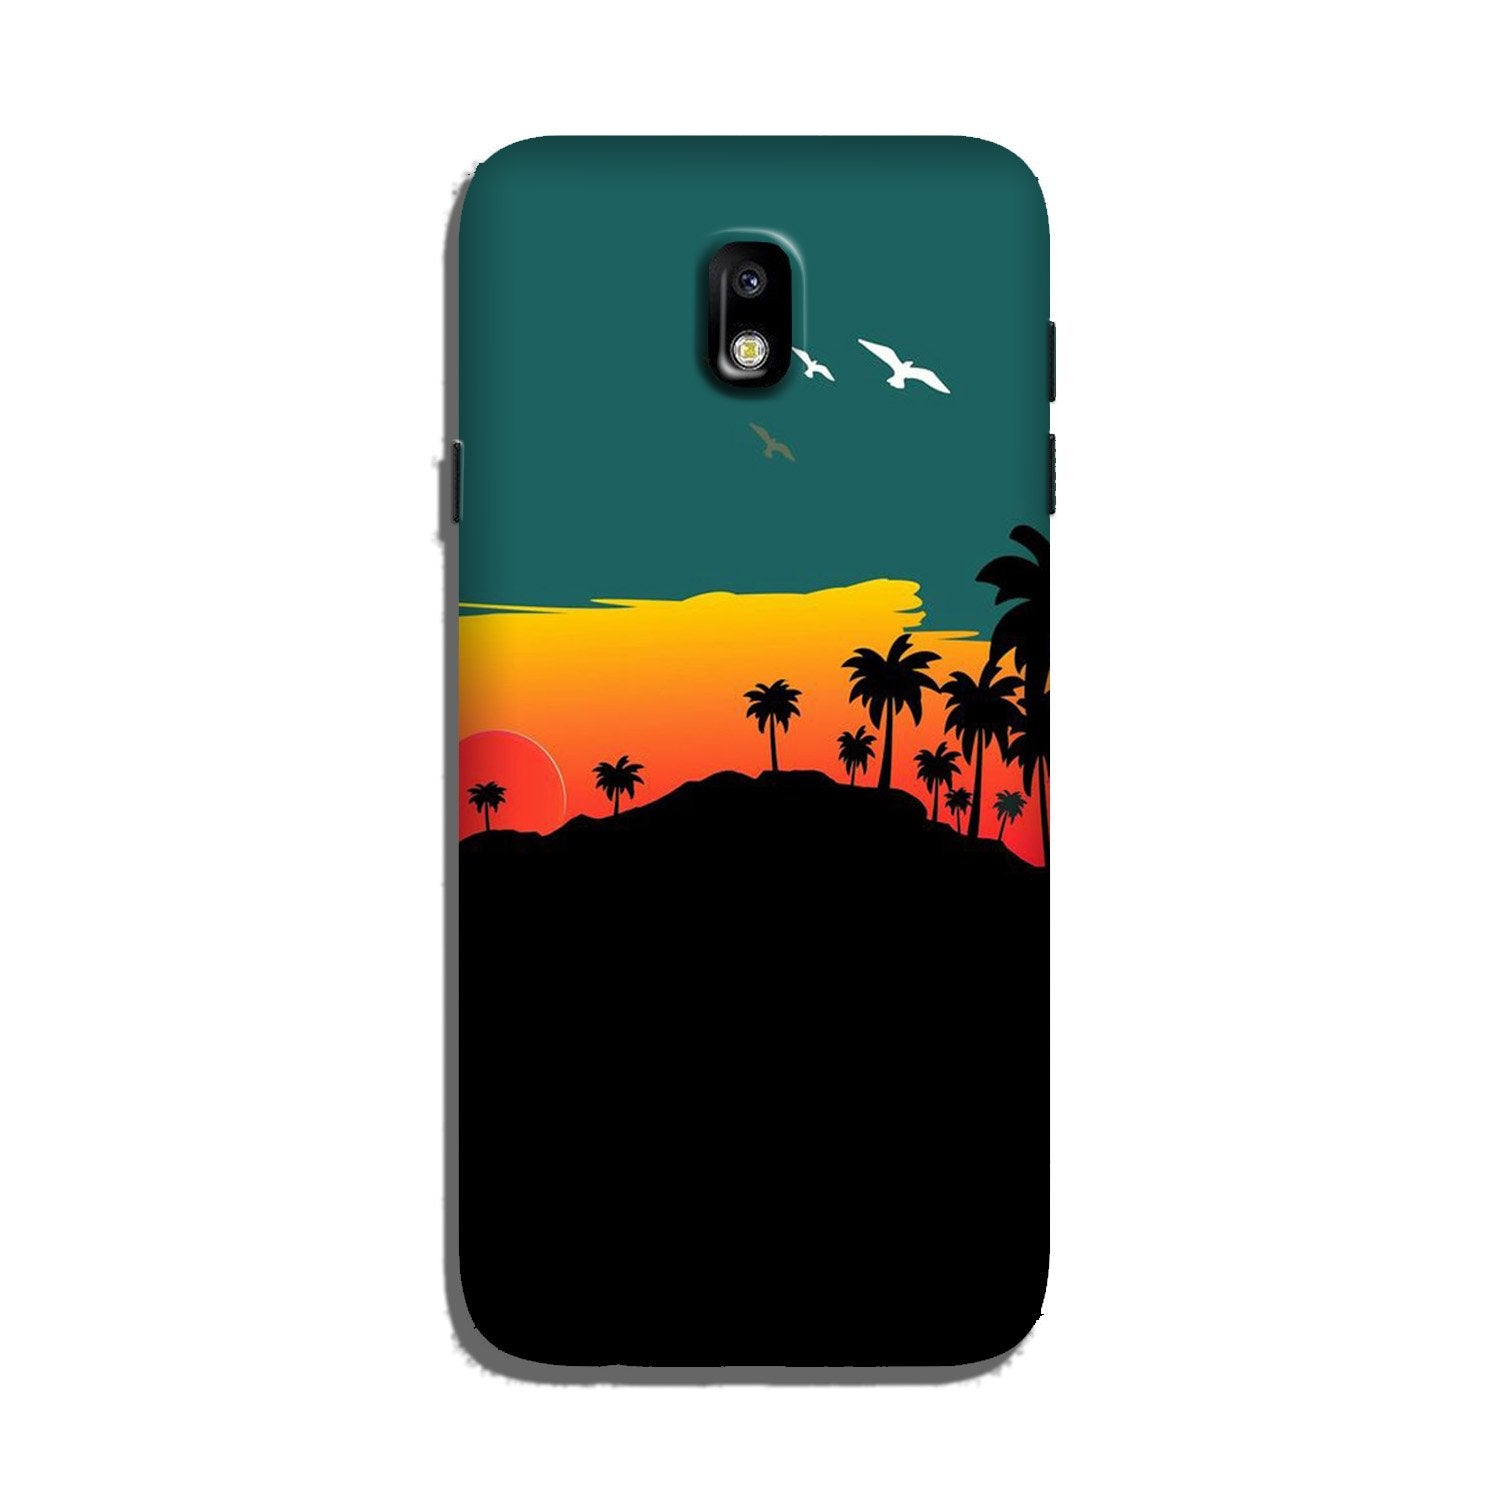 Sky Trees Case for Galaxy J7 Pro (Design - 191)